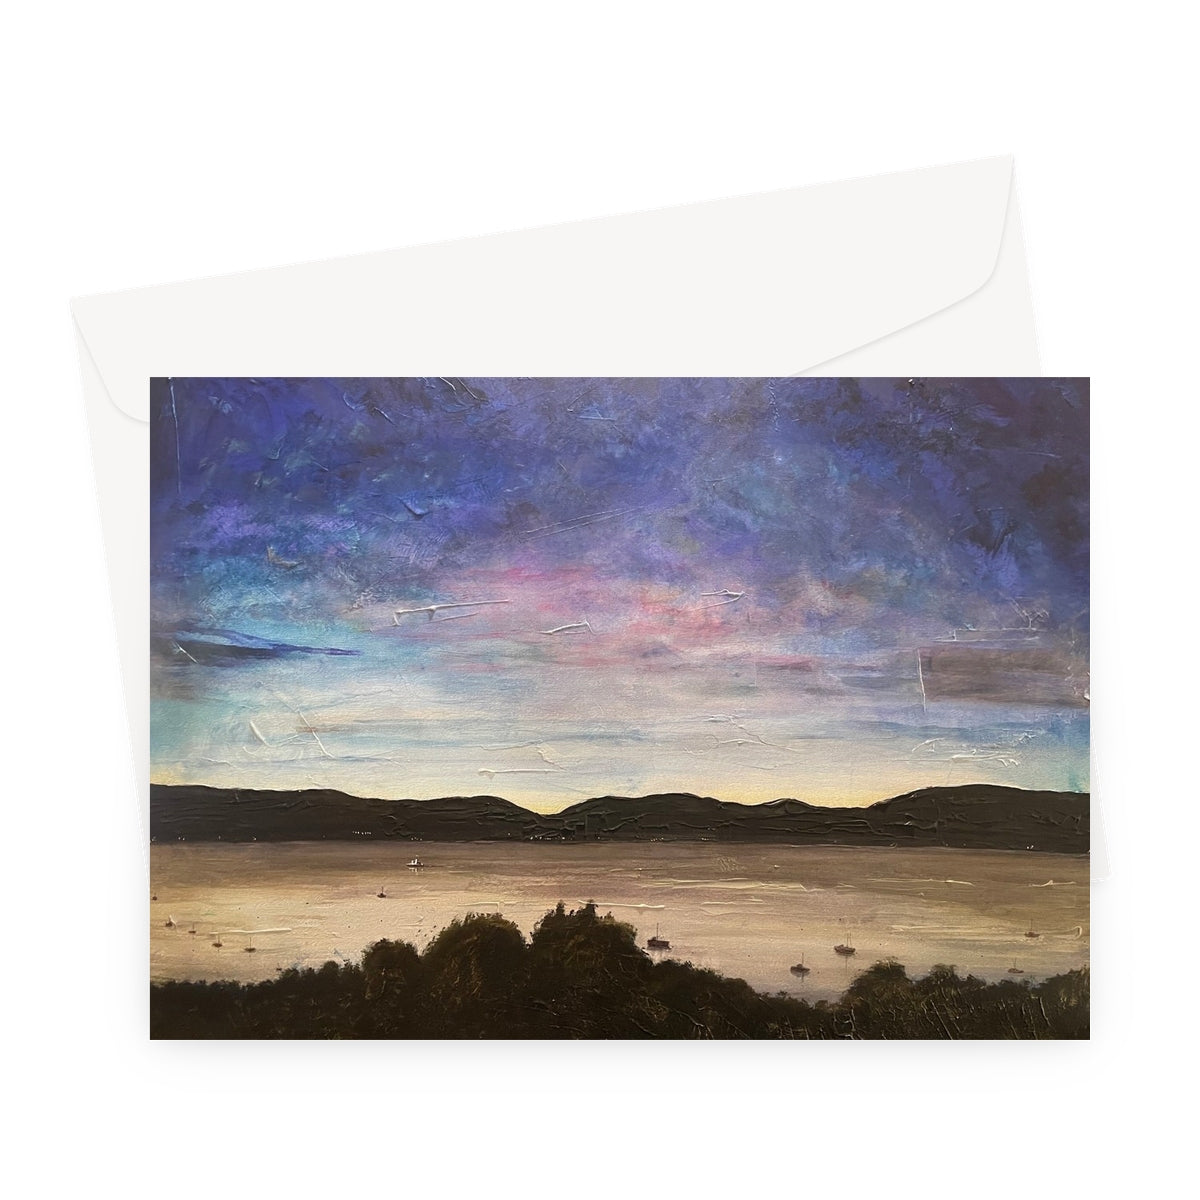 River Clyde Twilight Art Gifts Greeting Card-Stationery-River Clyde Art Gallery-A5 Landscape-1 Card-Paintings, Prints, Homeware, Art Gifts From Scotland By Scottish Artist Kevin Hunter